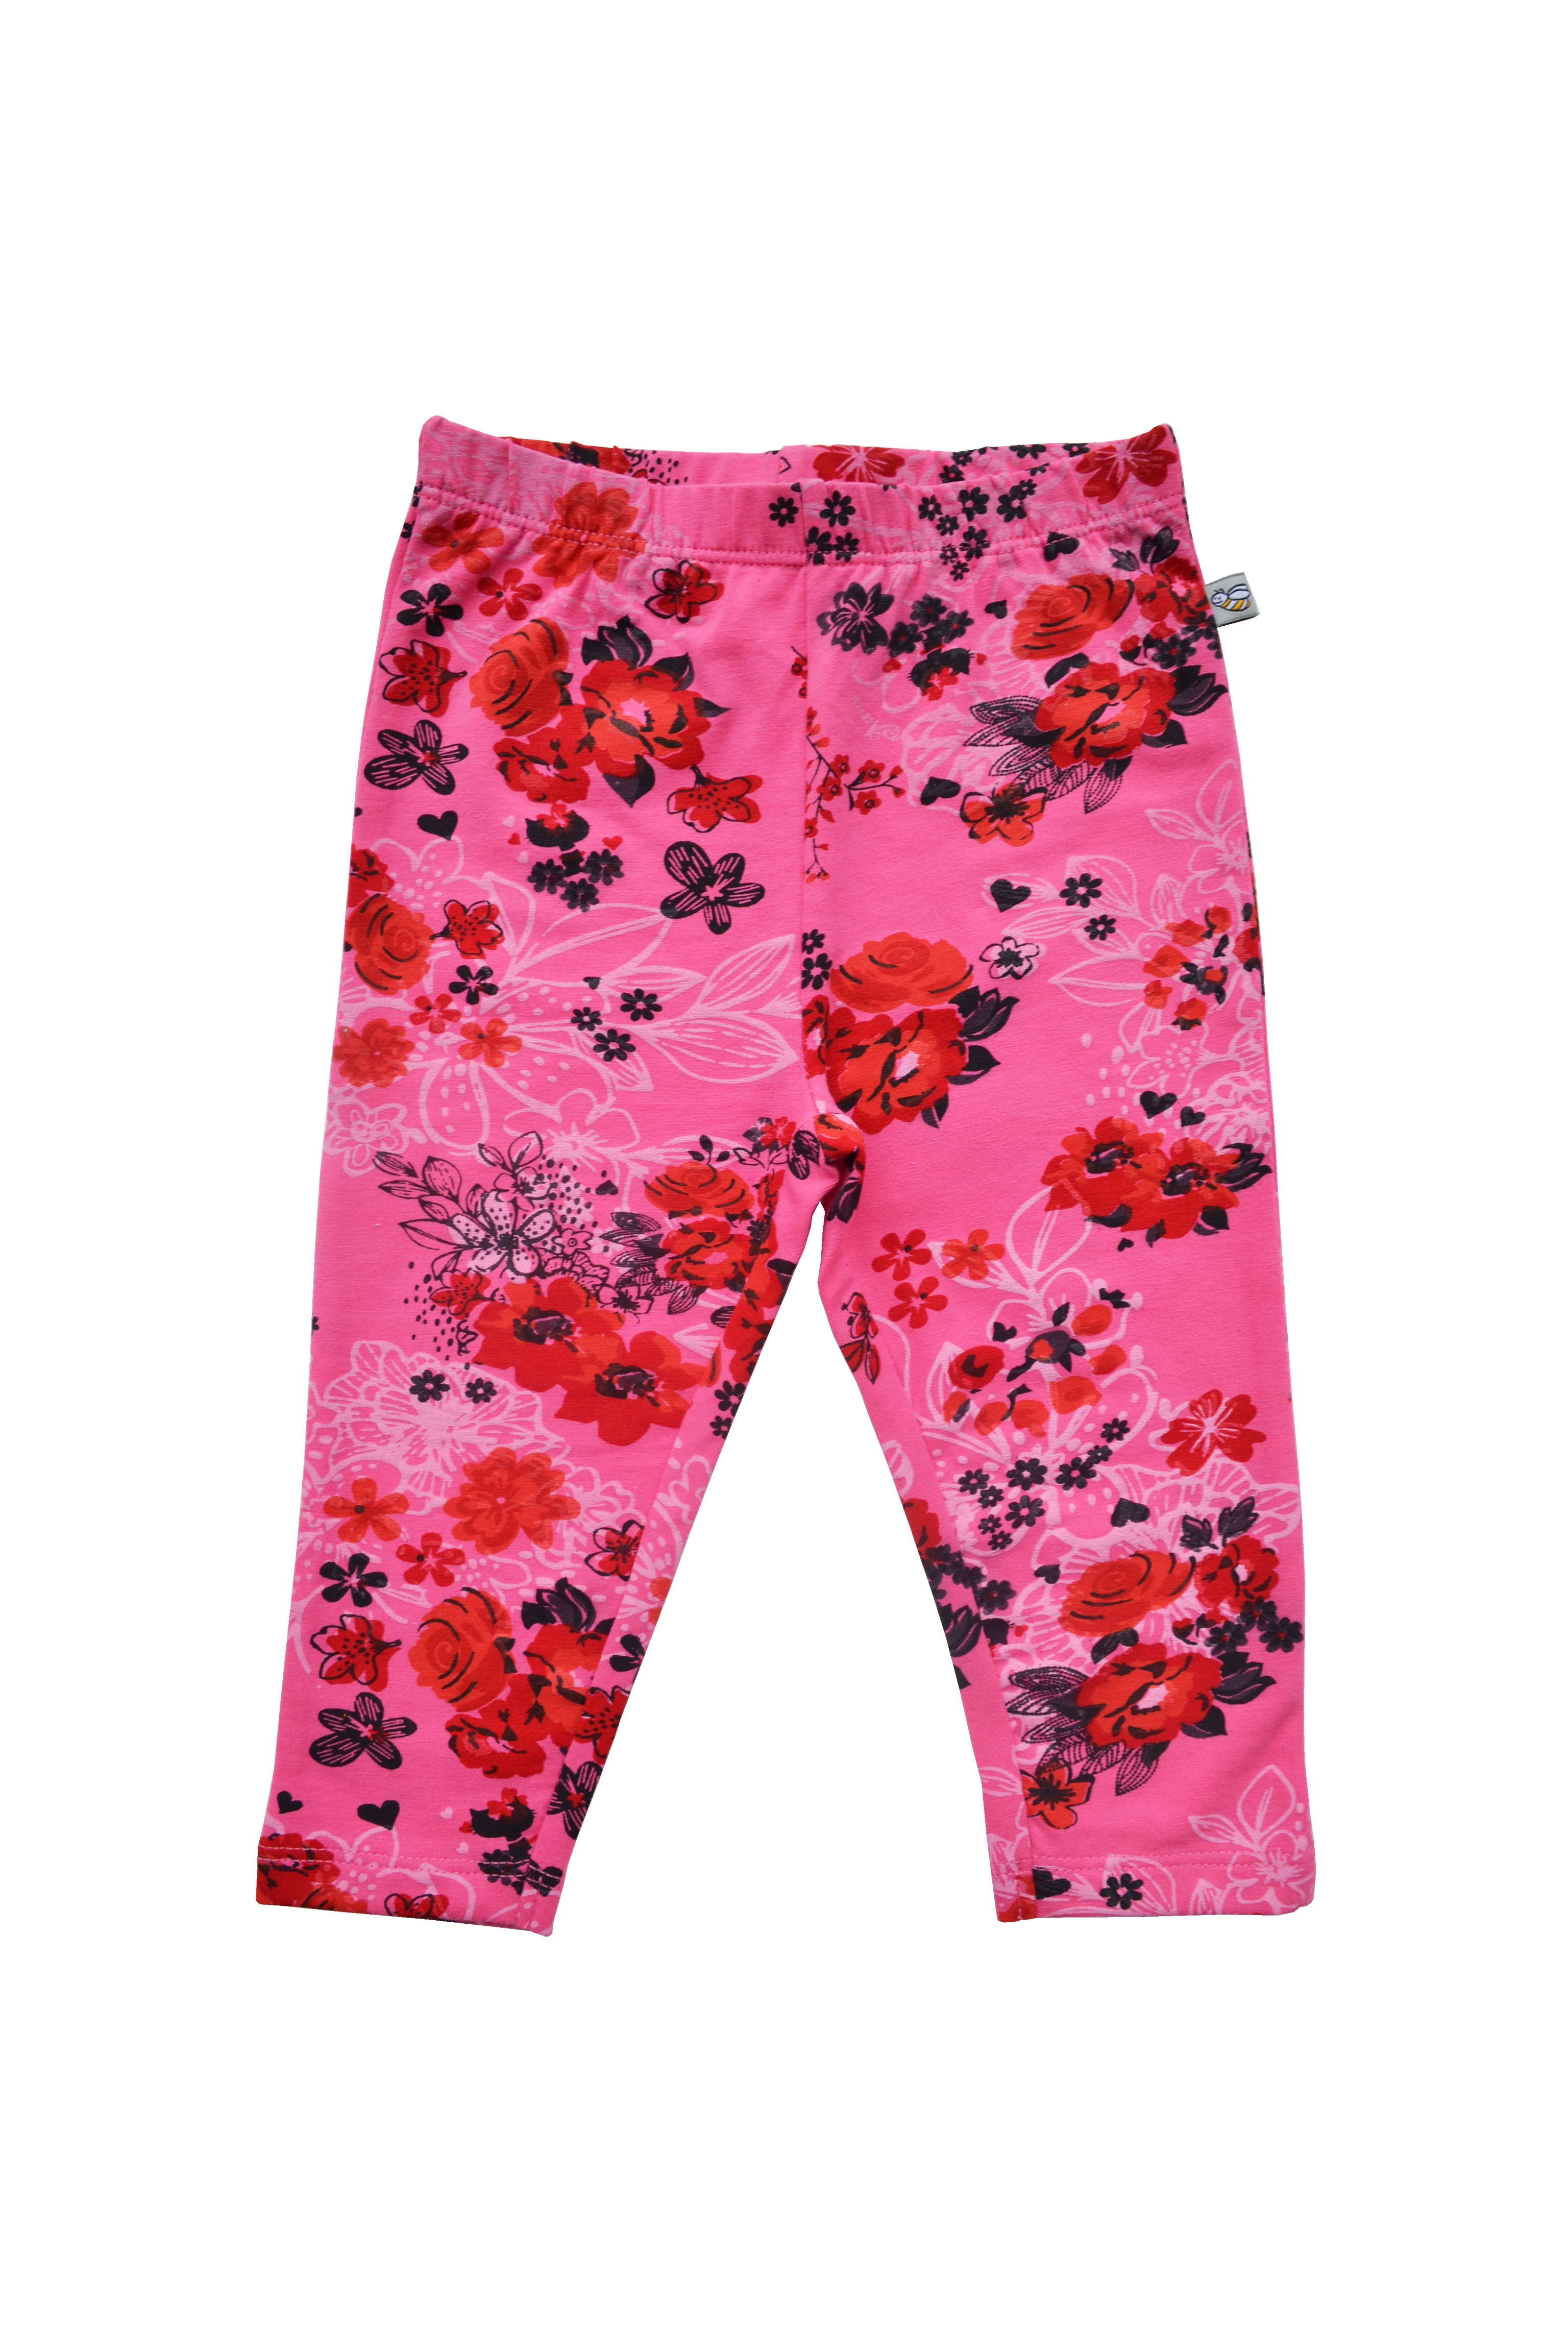 Babeez | Girls Pink Leggings with Red Flowers (95% Cotton 5%Elasthan Jersey) undefined